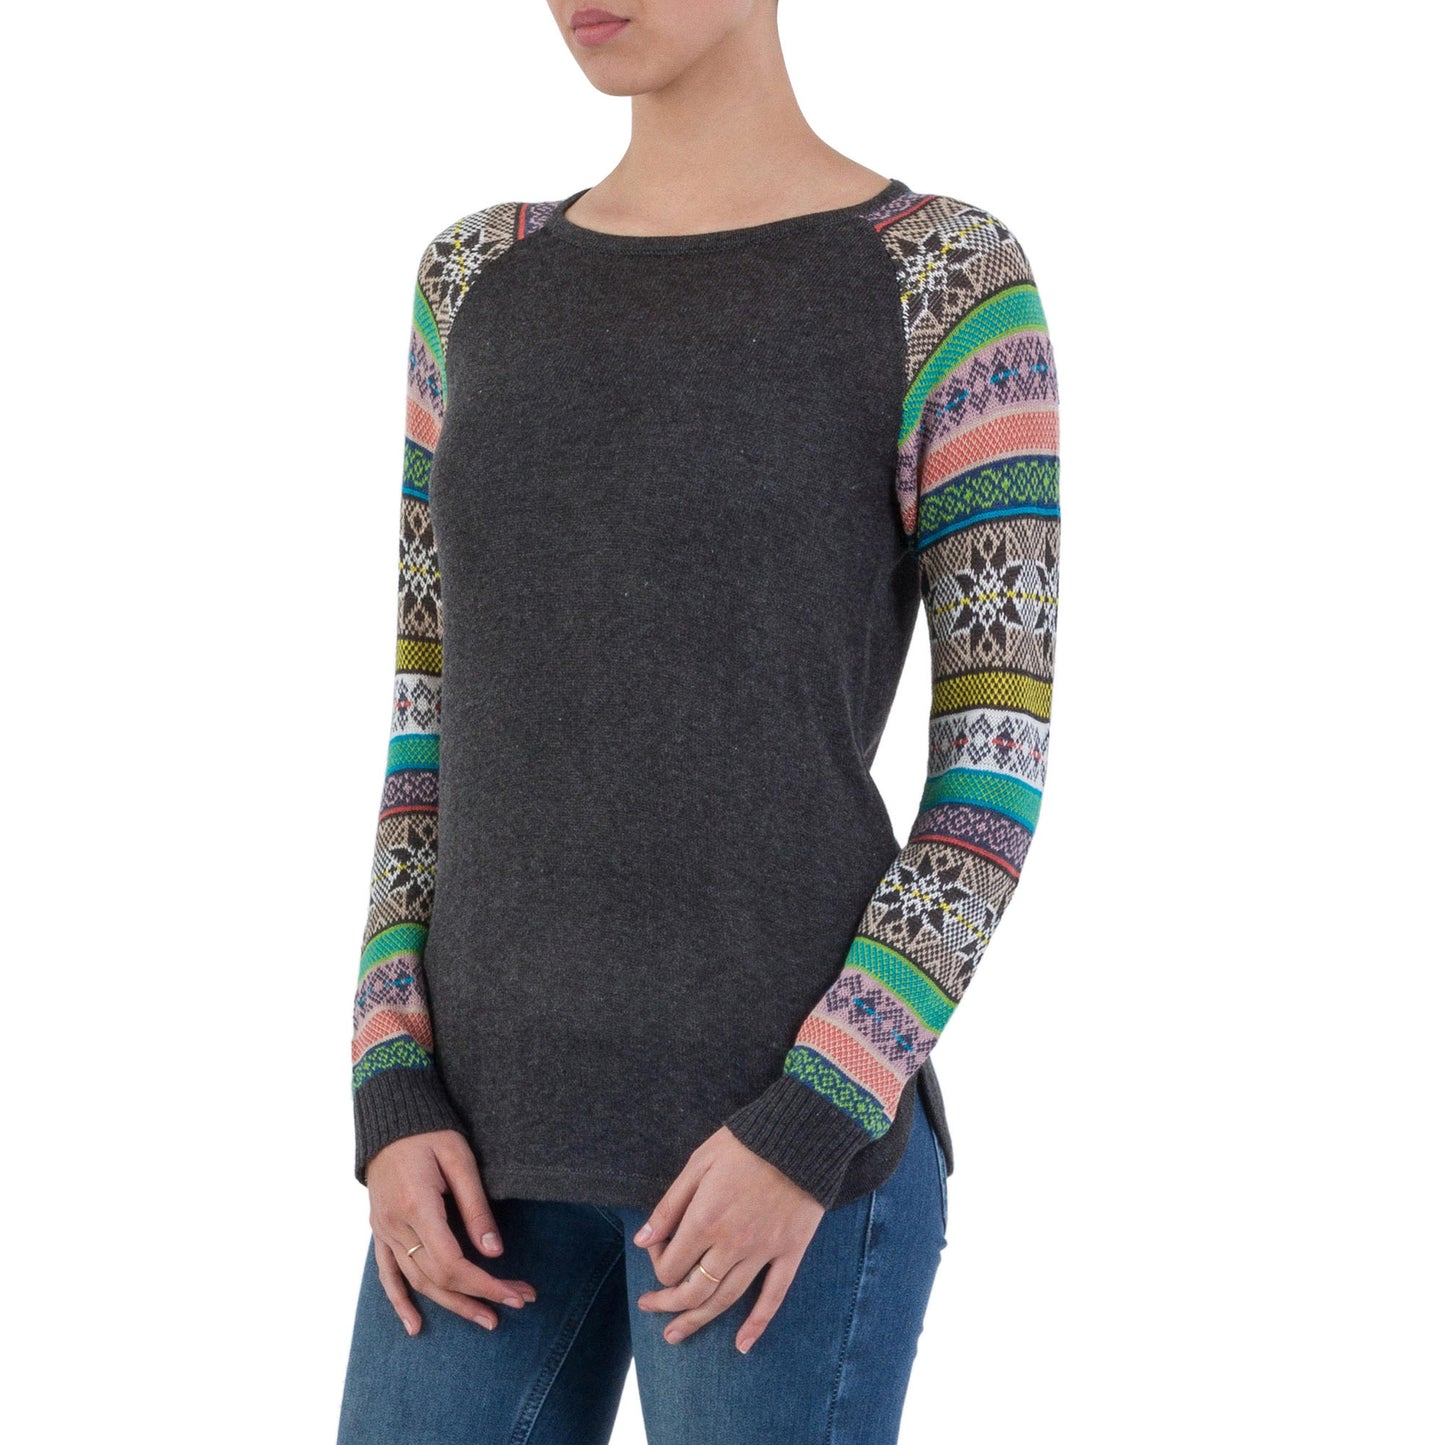 Andean Star in Charcoal Knit Sweater